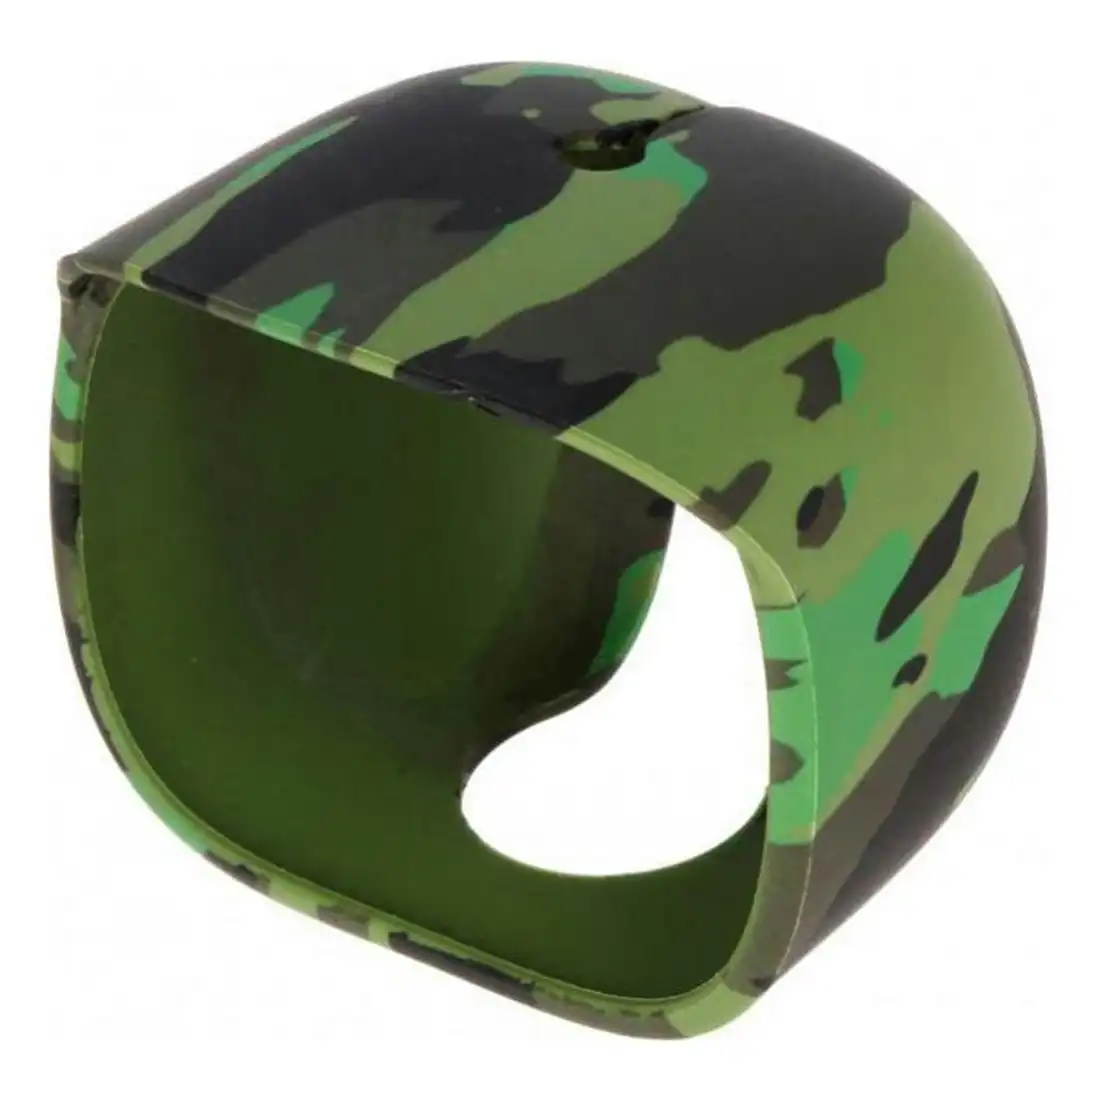 Imou Silicon Cover for Cell Pro Camera FRS20-C - Camouflage